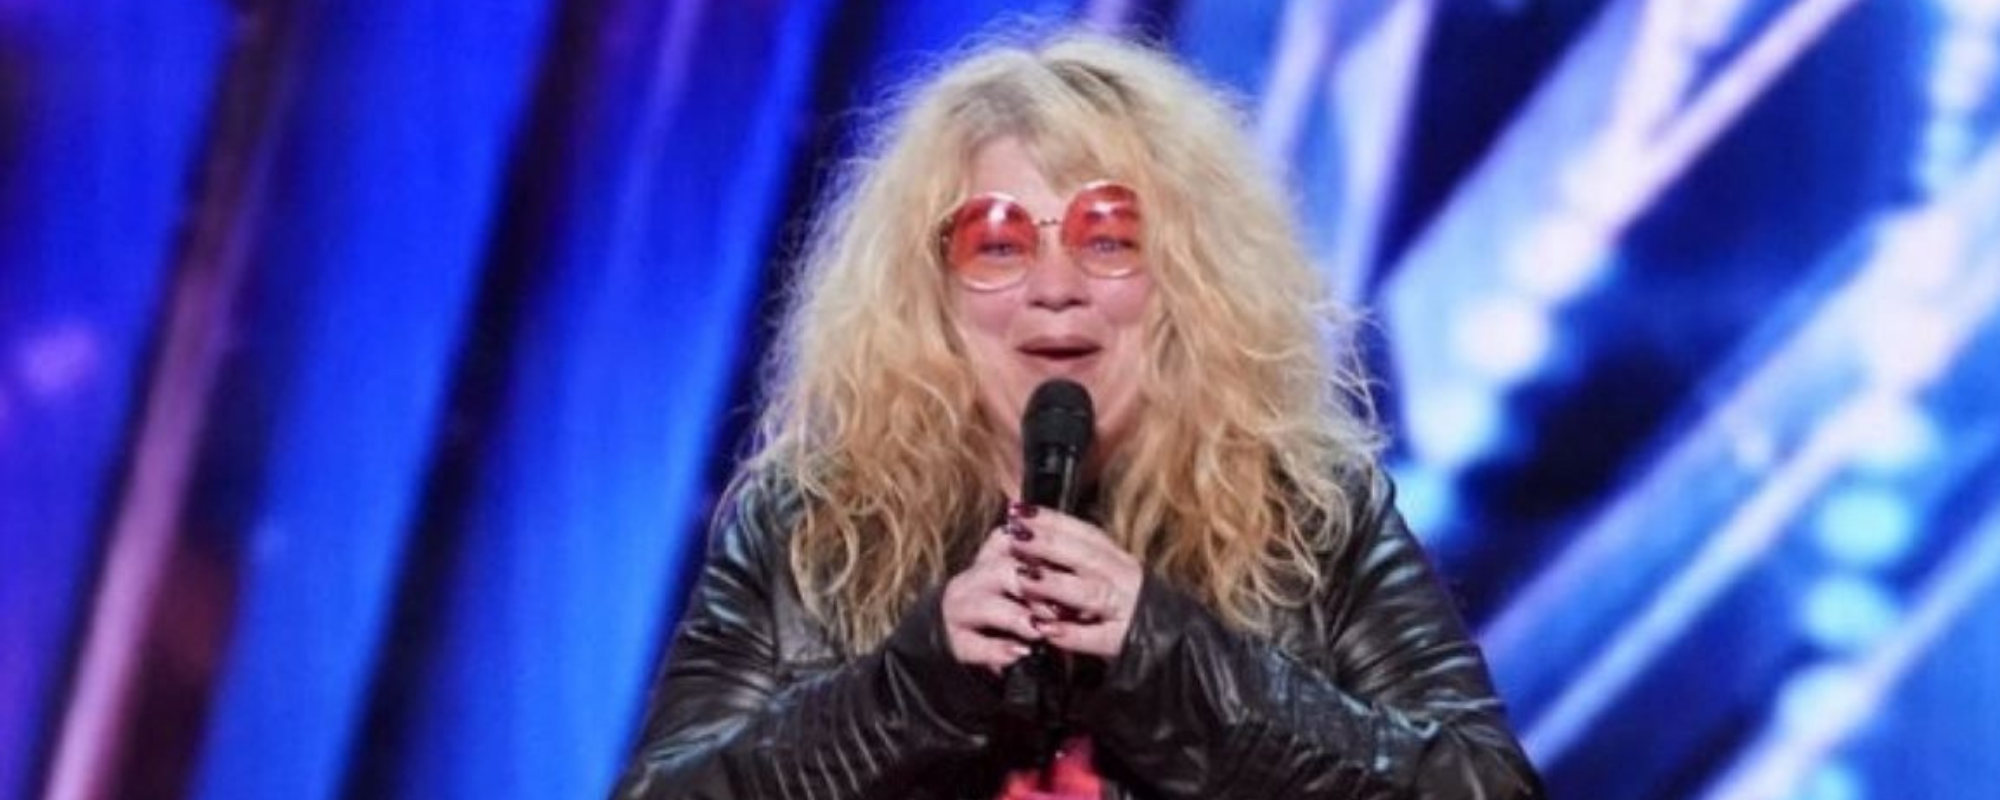 ‘America’s Got Talent’: Audience Boos Simon Cowell, Anica Moves Into Next Round with Spirited Rendition of Janis Joplin’s “Piece Of My Heart”